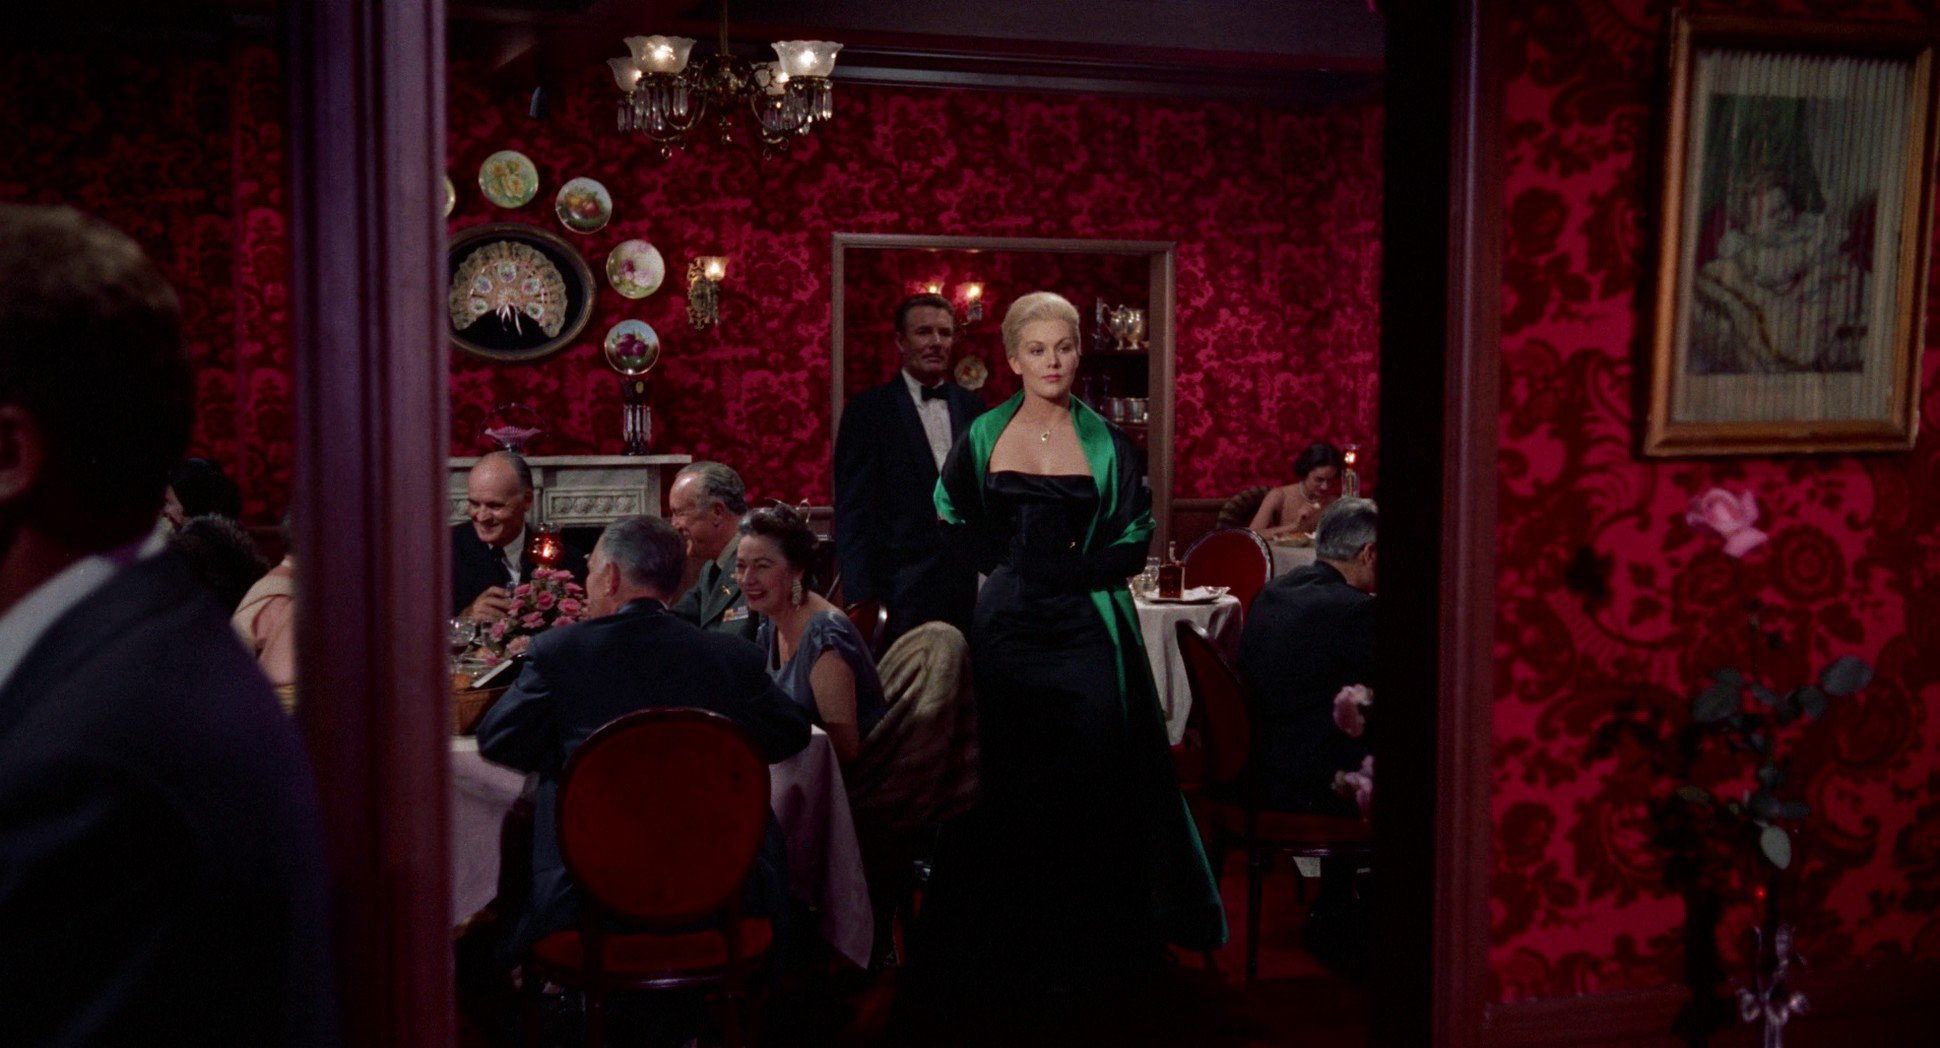 Kim Novak wearing a green 1950's cocktail dress entering a crowded restaurant with red damask wallpaper. 